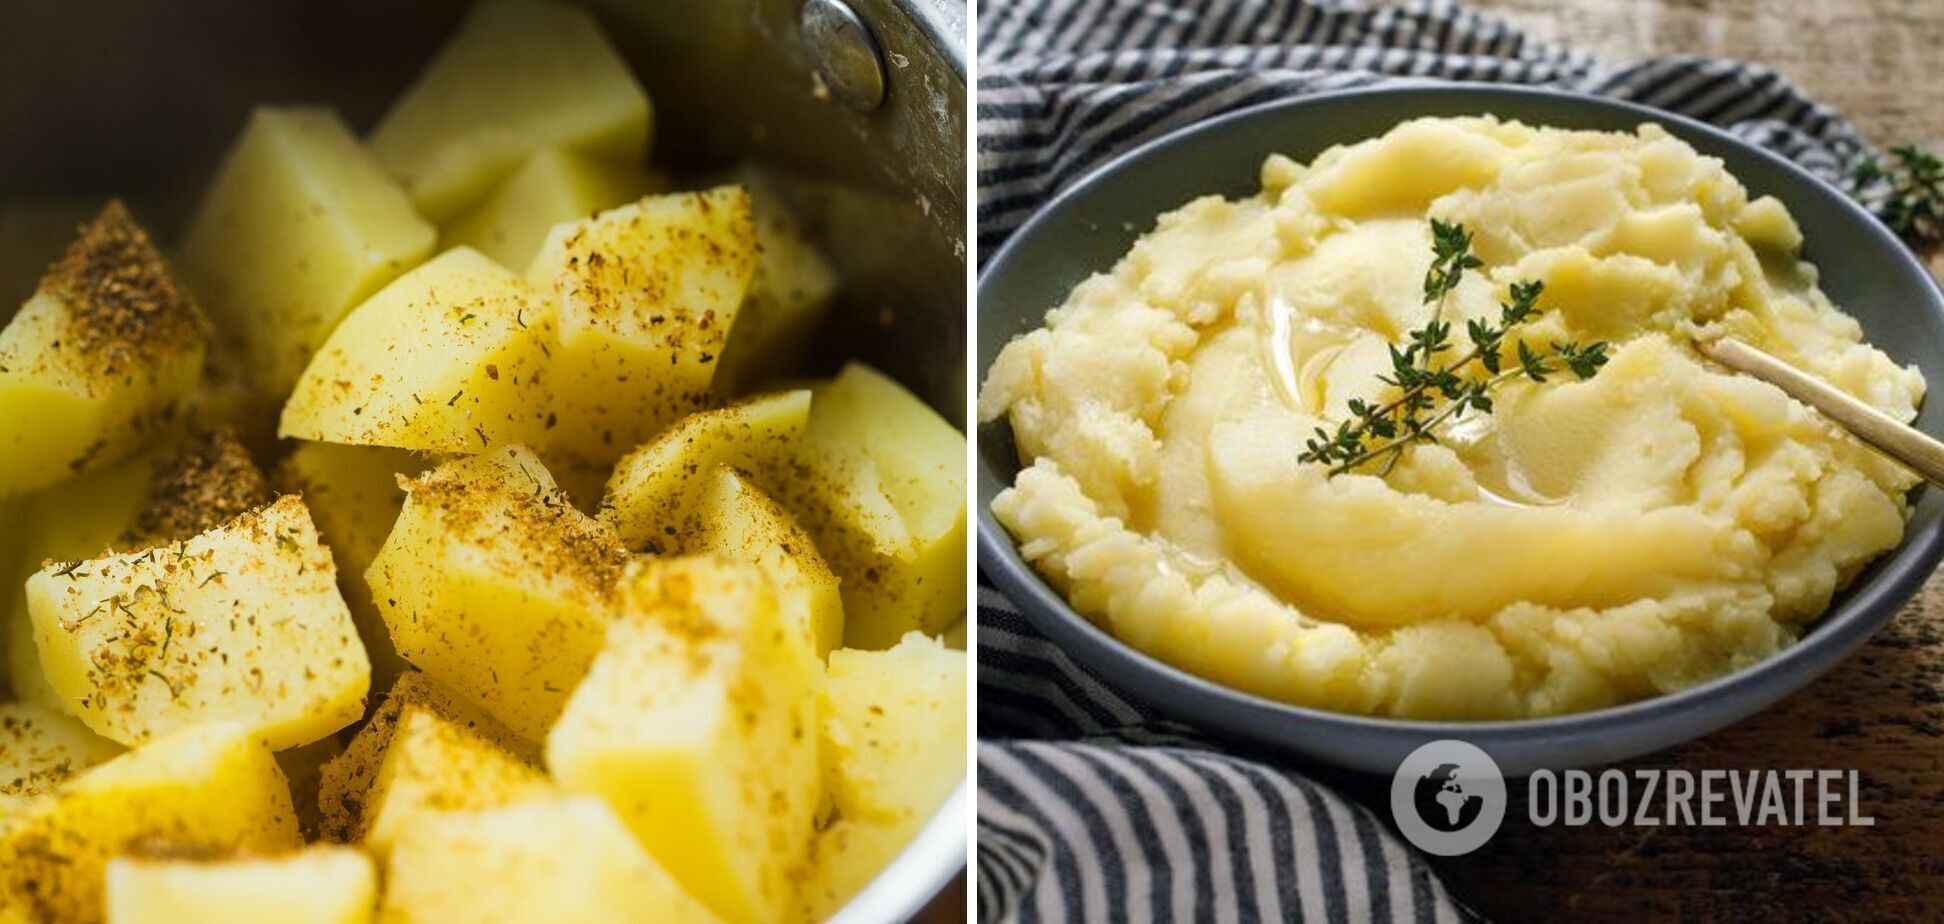 Homemade delicious mashed potatoes